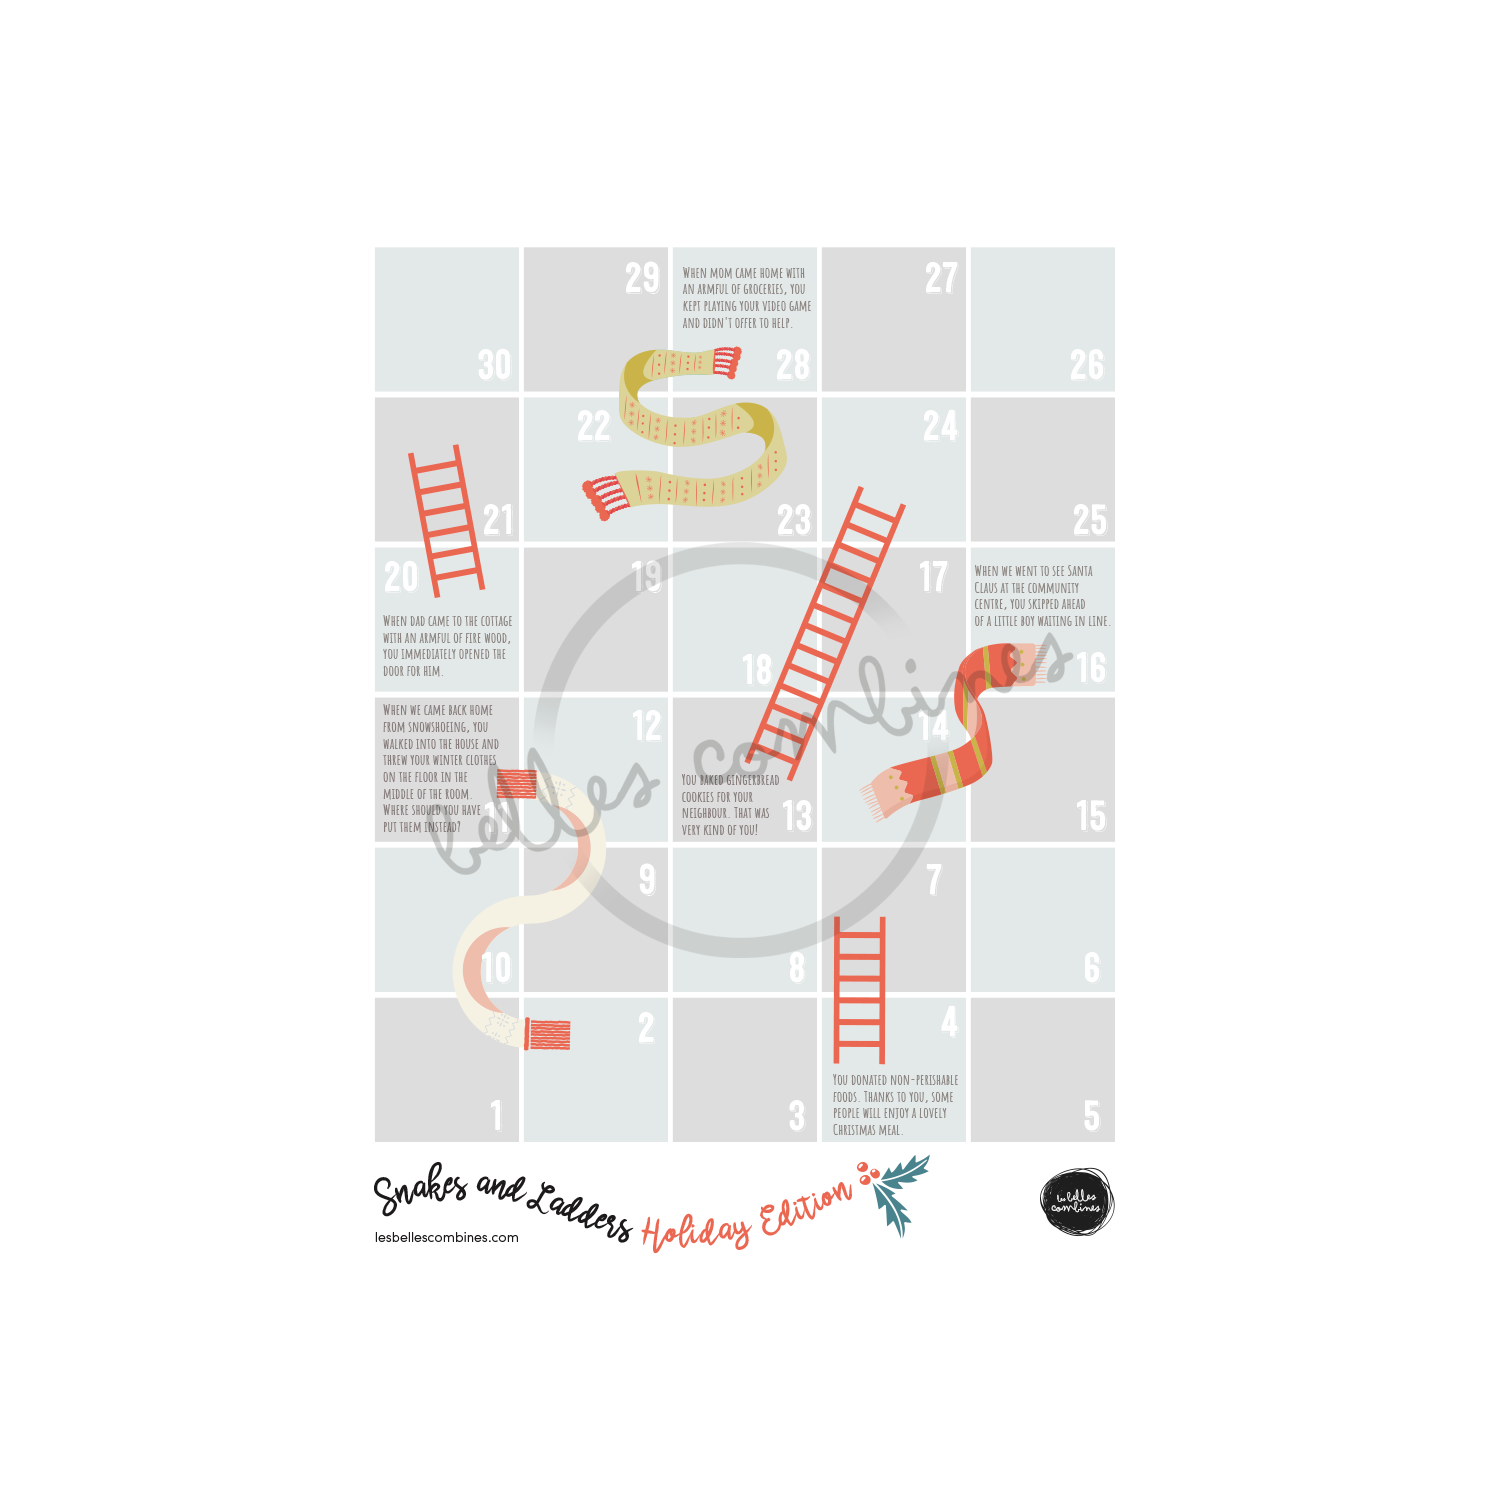 English version of the Christmas snakes and ladders to print made by Les Belles Combines